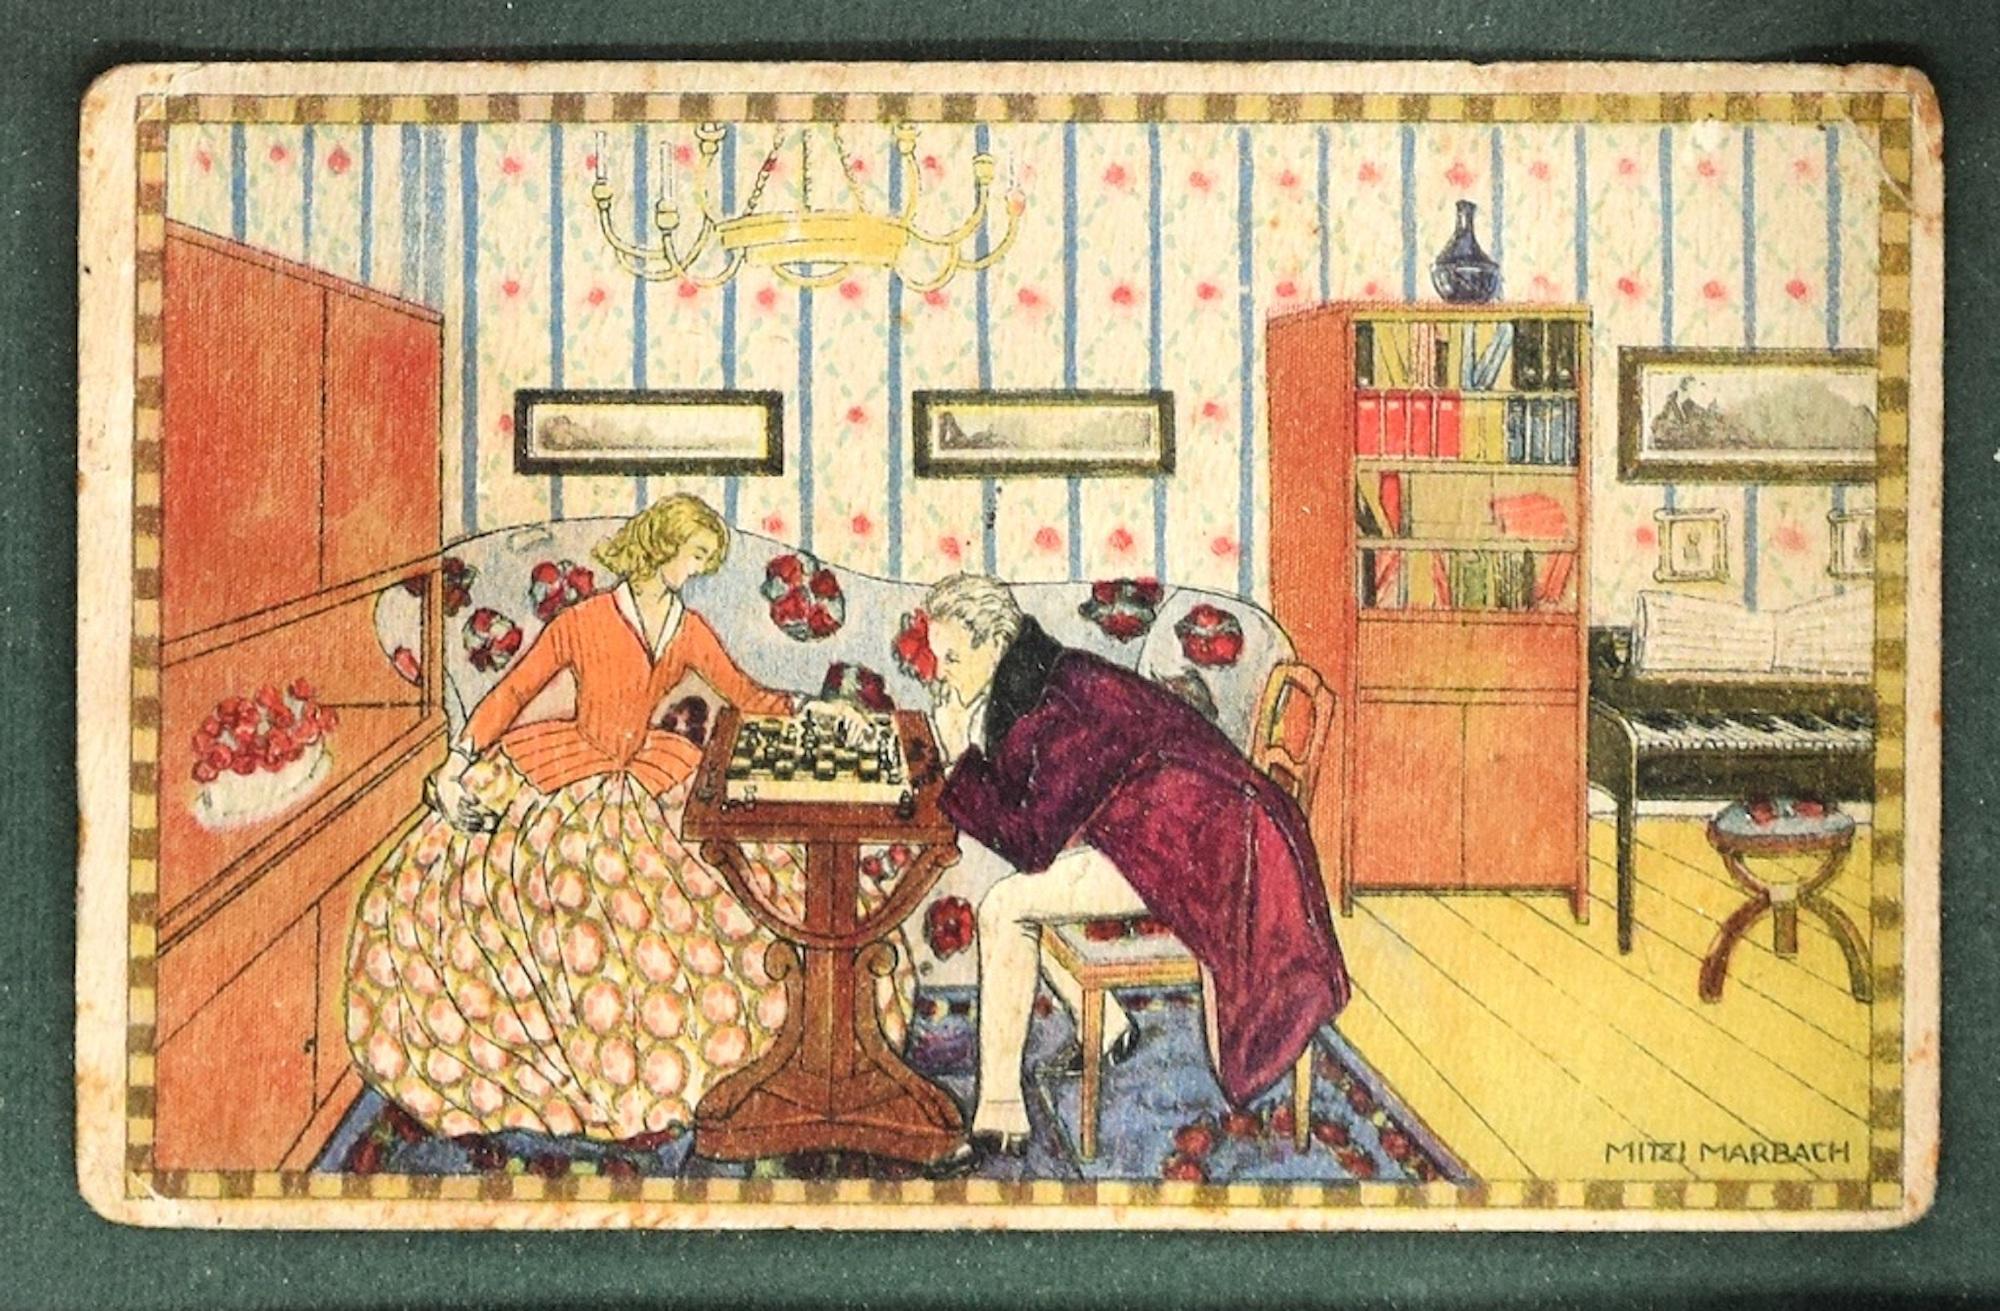 Chess Game - Vintage Postcard designed by Mitzi Marbach - Early 1900